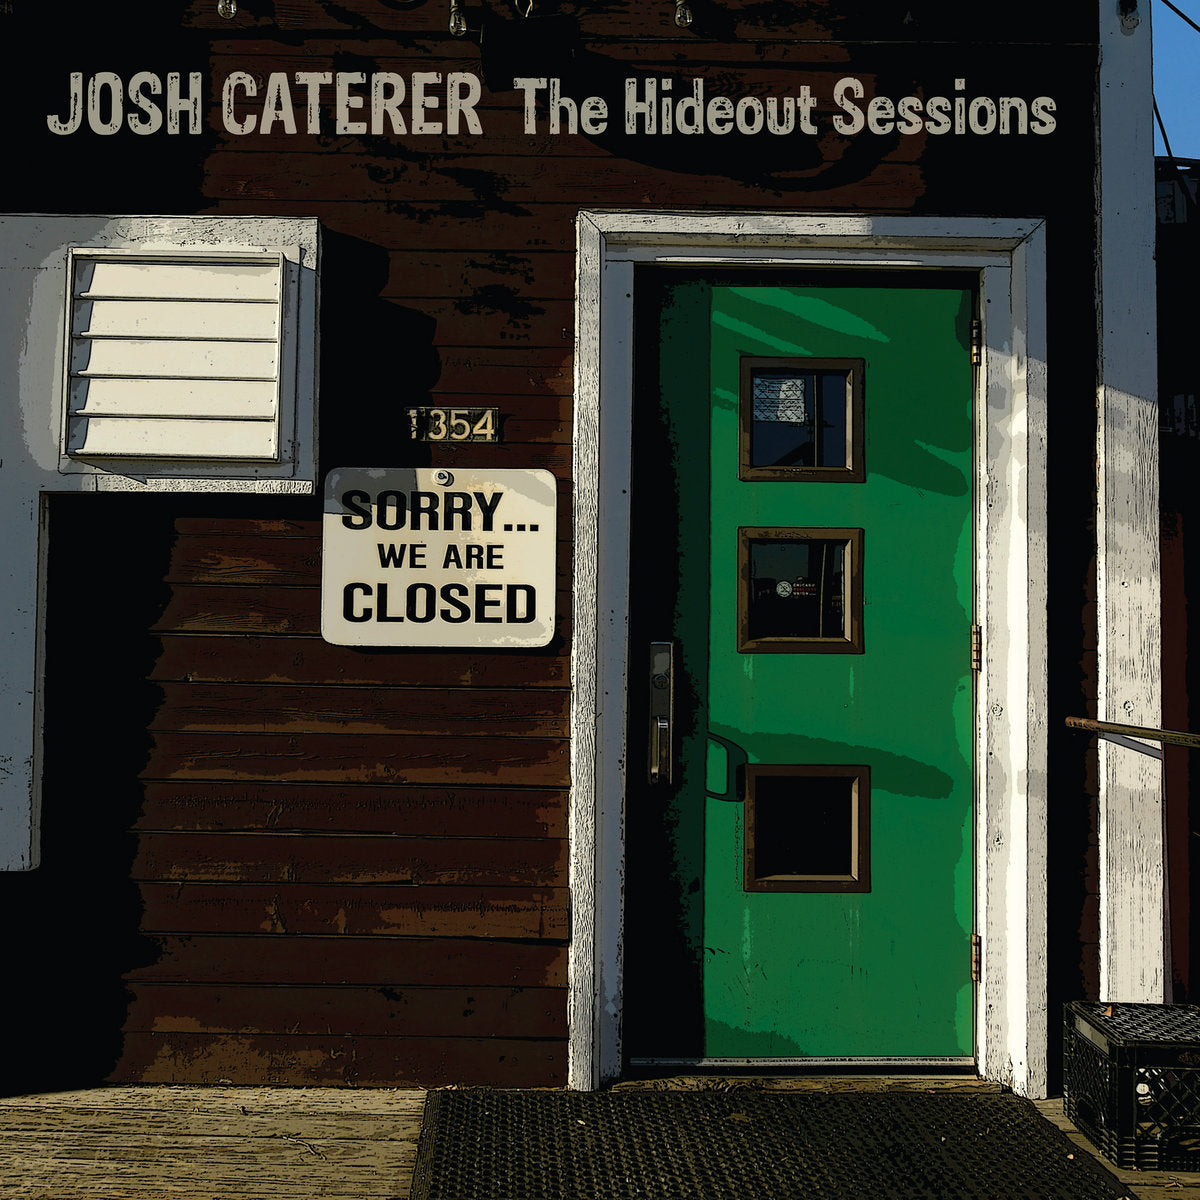 Caterer, Josh - The Hideout Sessions